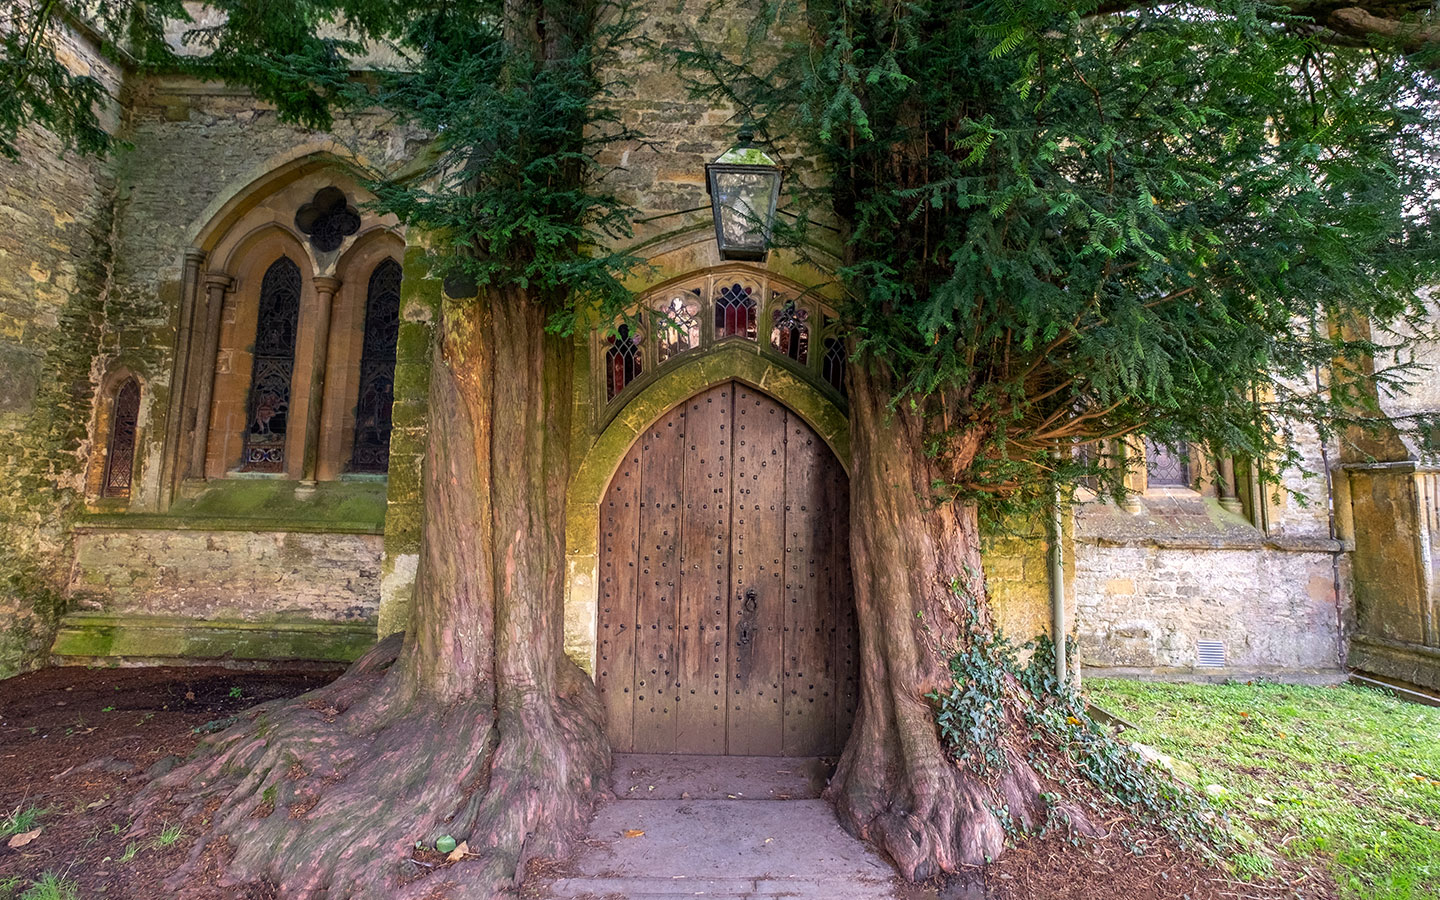 The Yew Tree Door or Tolkein Door at St Edward's Church, one of the top things to do in Stow-on-the-Wold